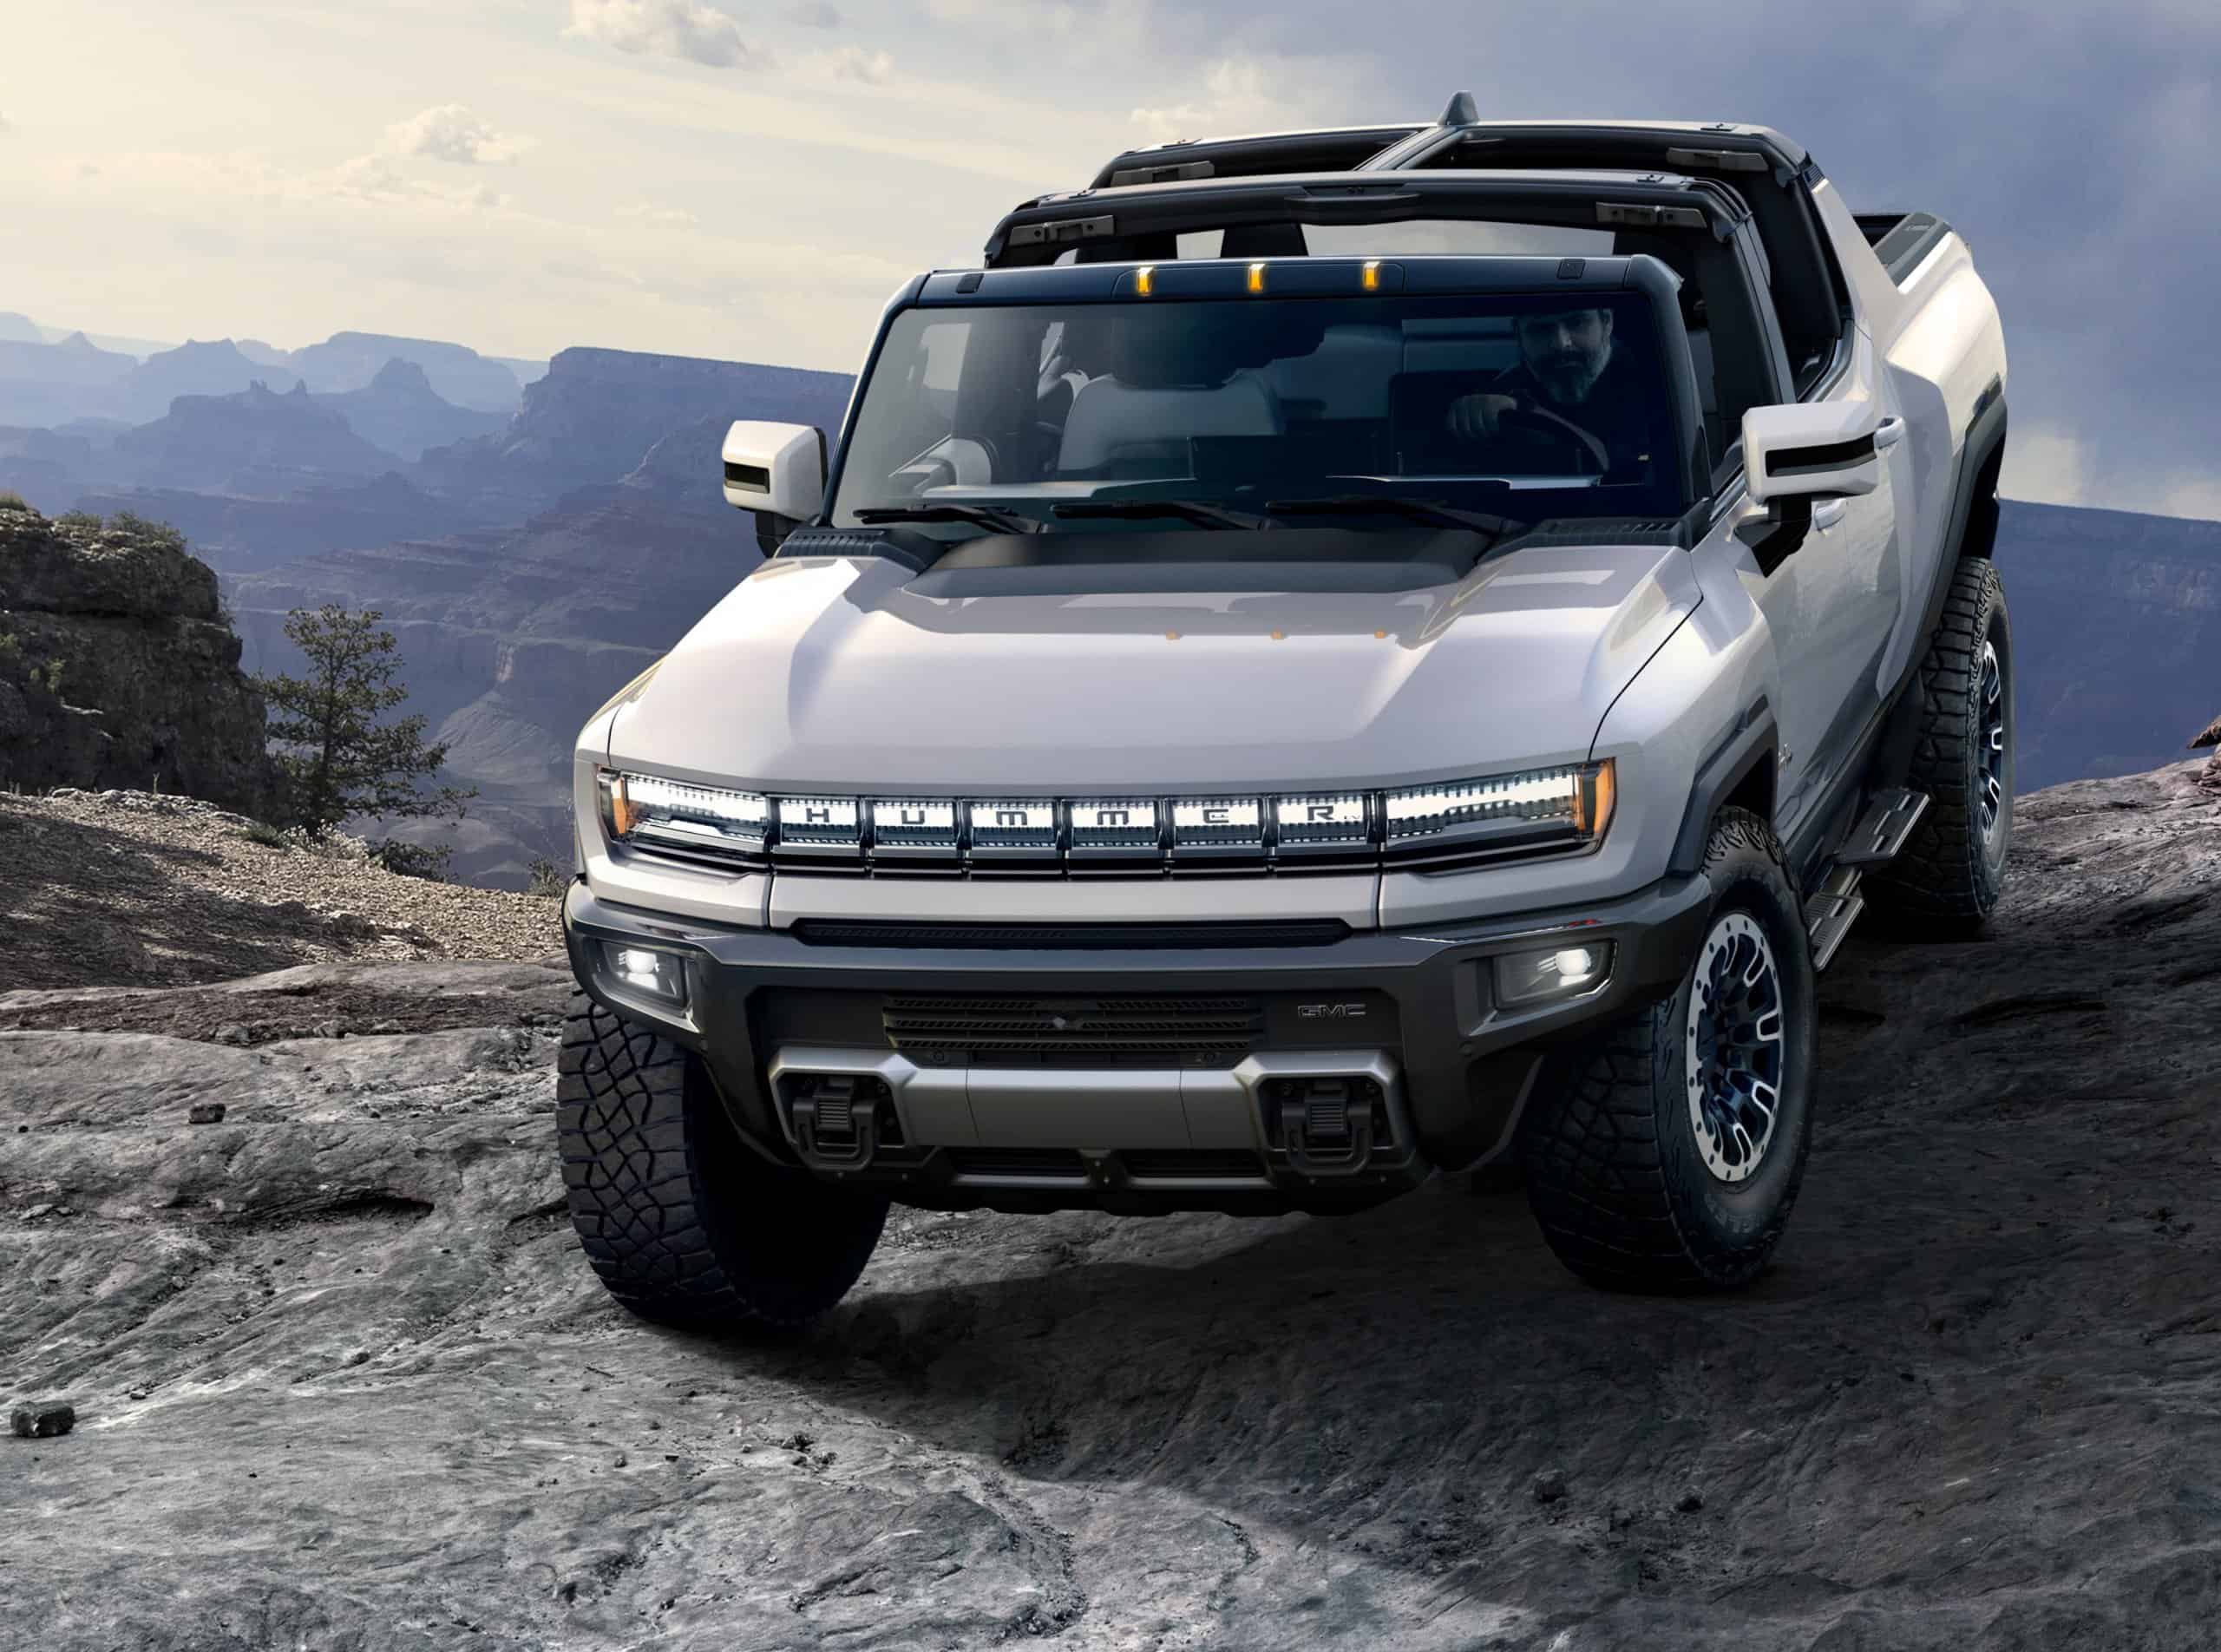 GMC unveils electric Hummer pickup truck Handy Tips